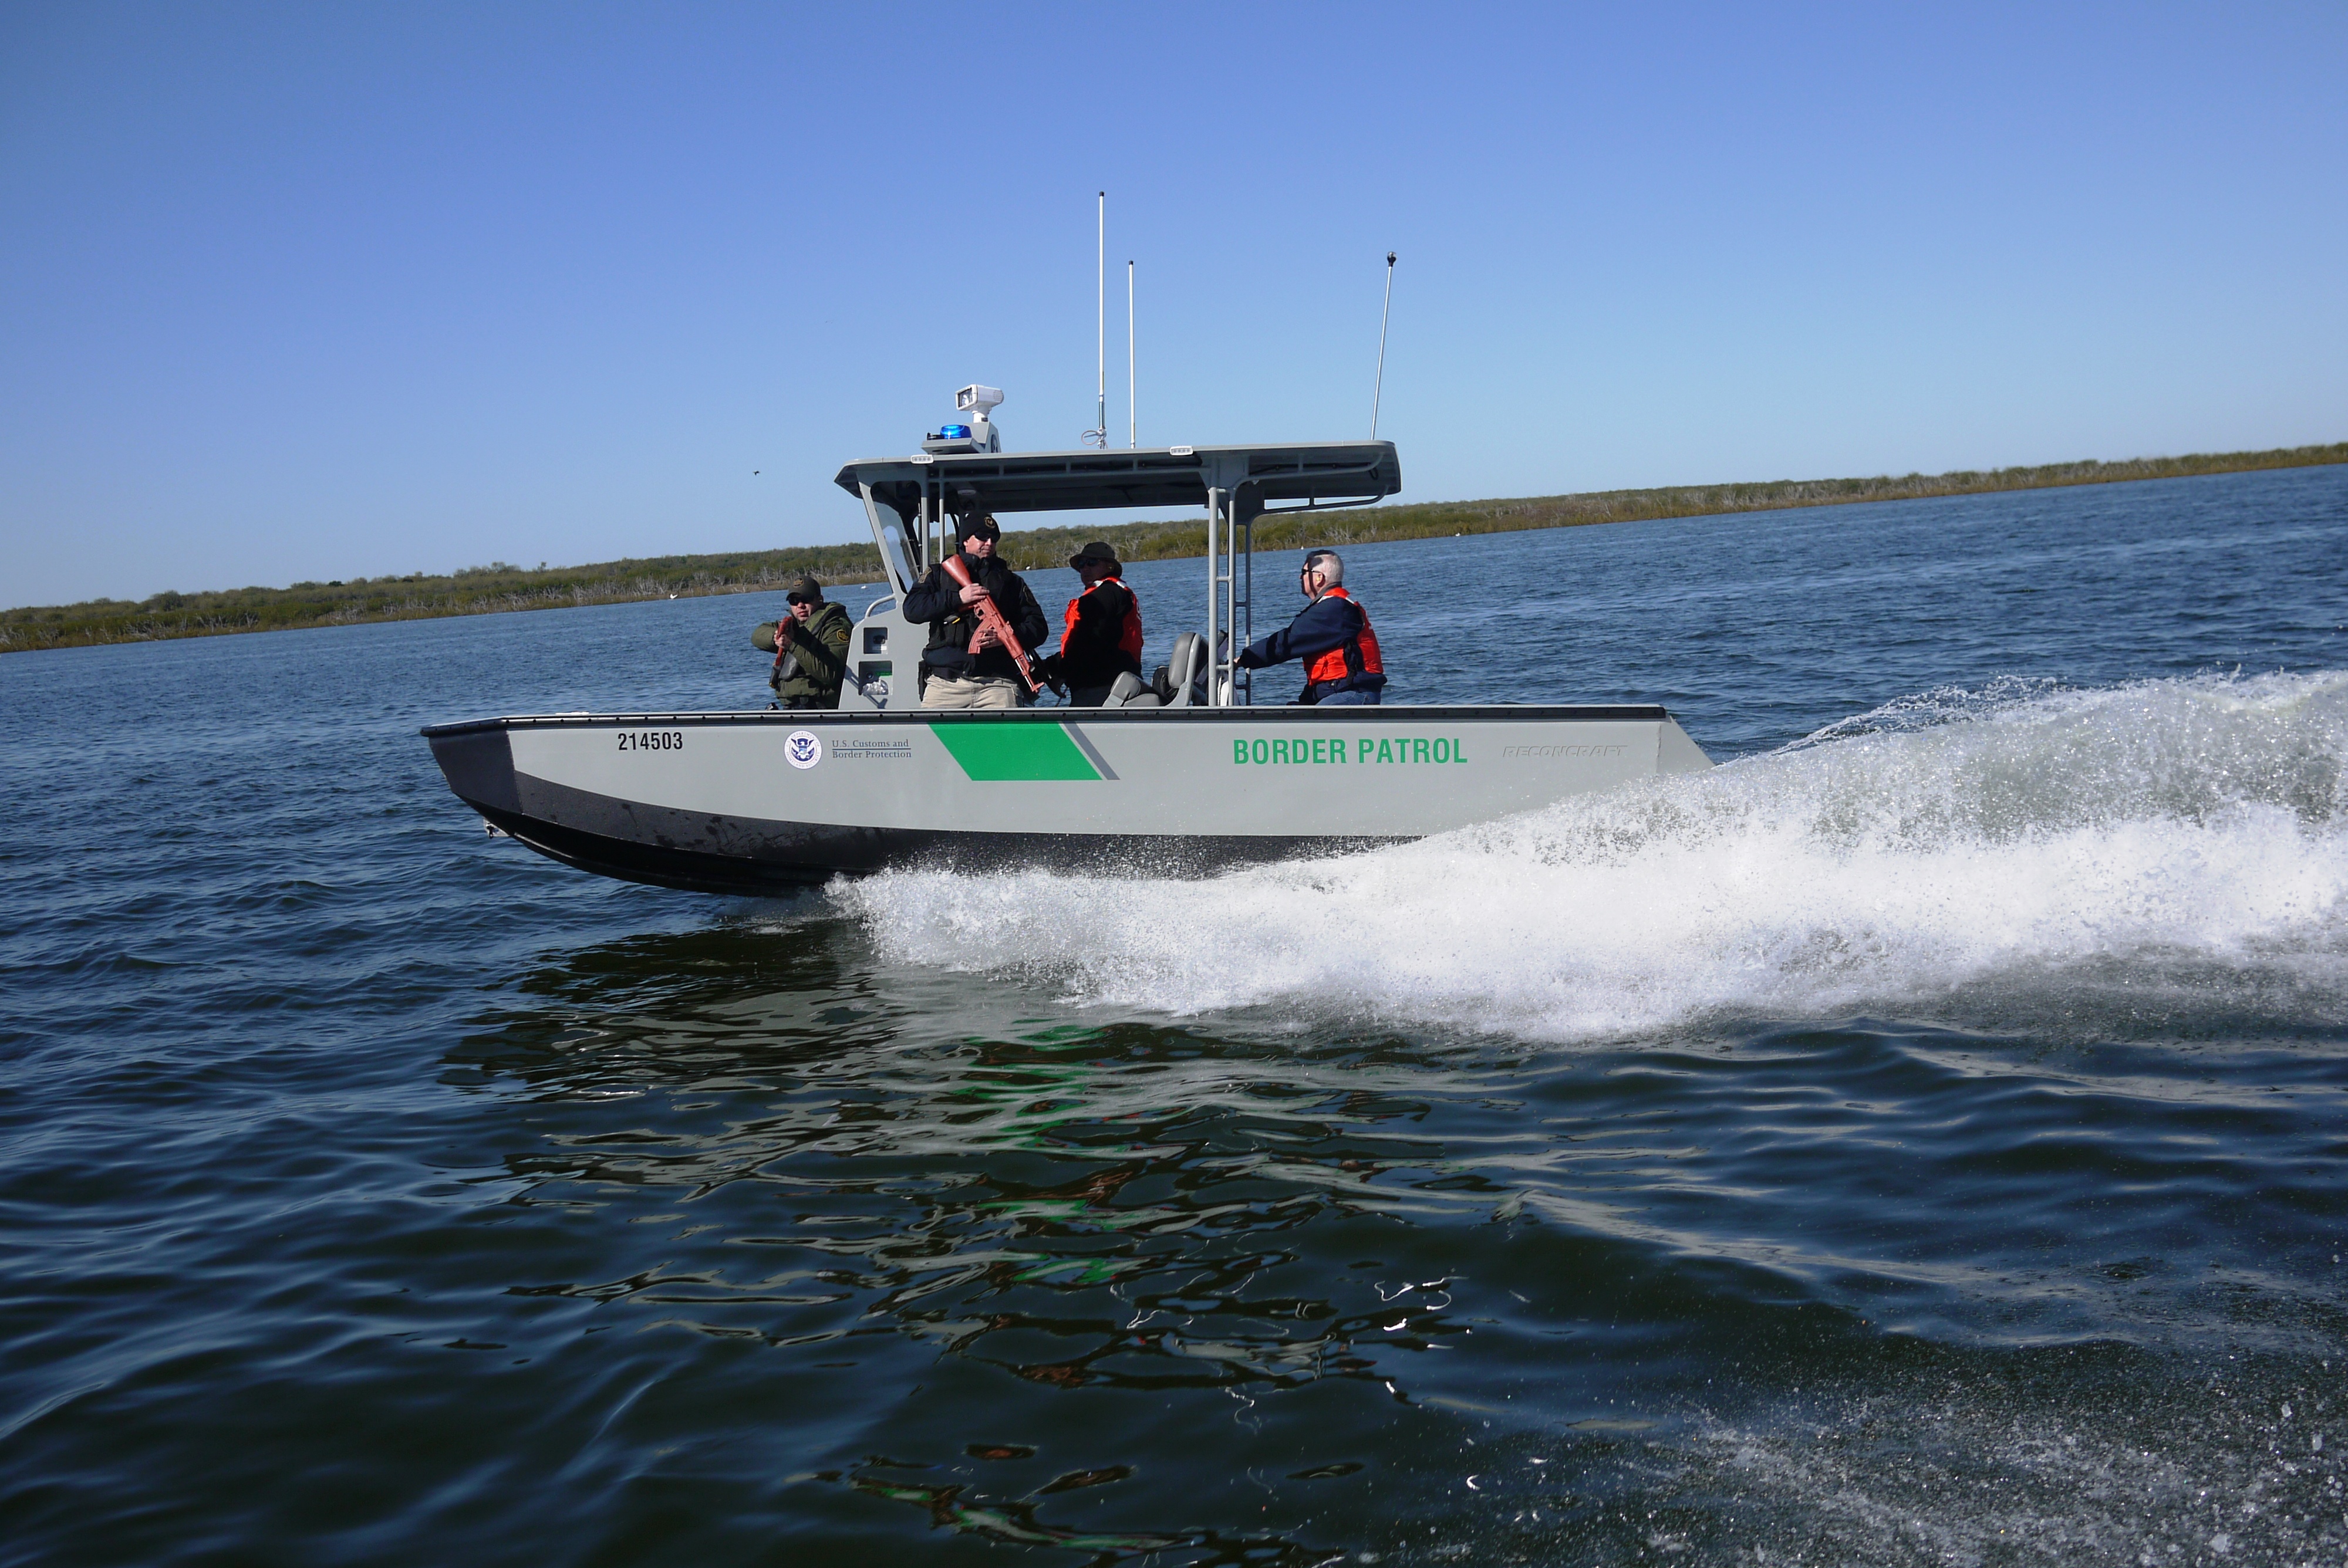 Avoiding the use of propellors in shallow waters, the new Riverine Shallow Draft Vessel uses advanced water jet technology.